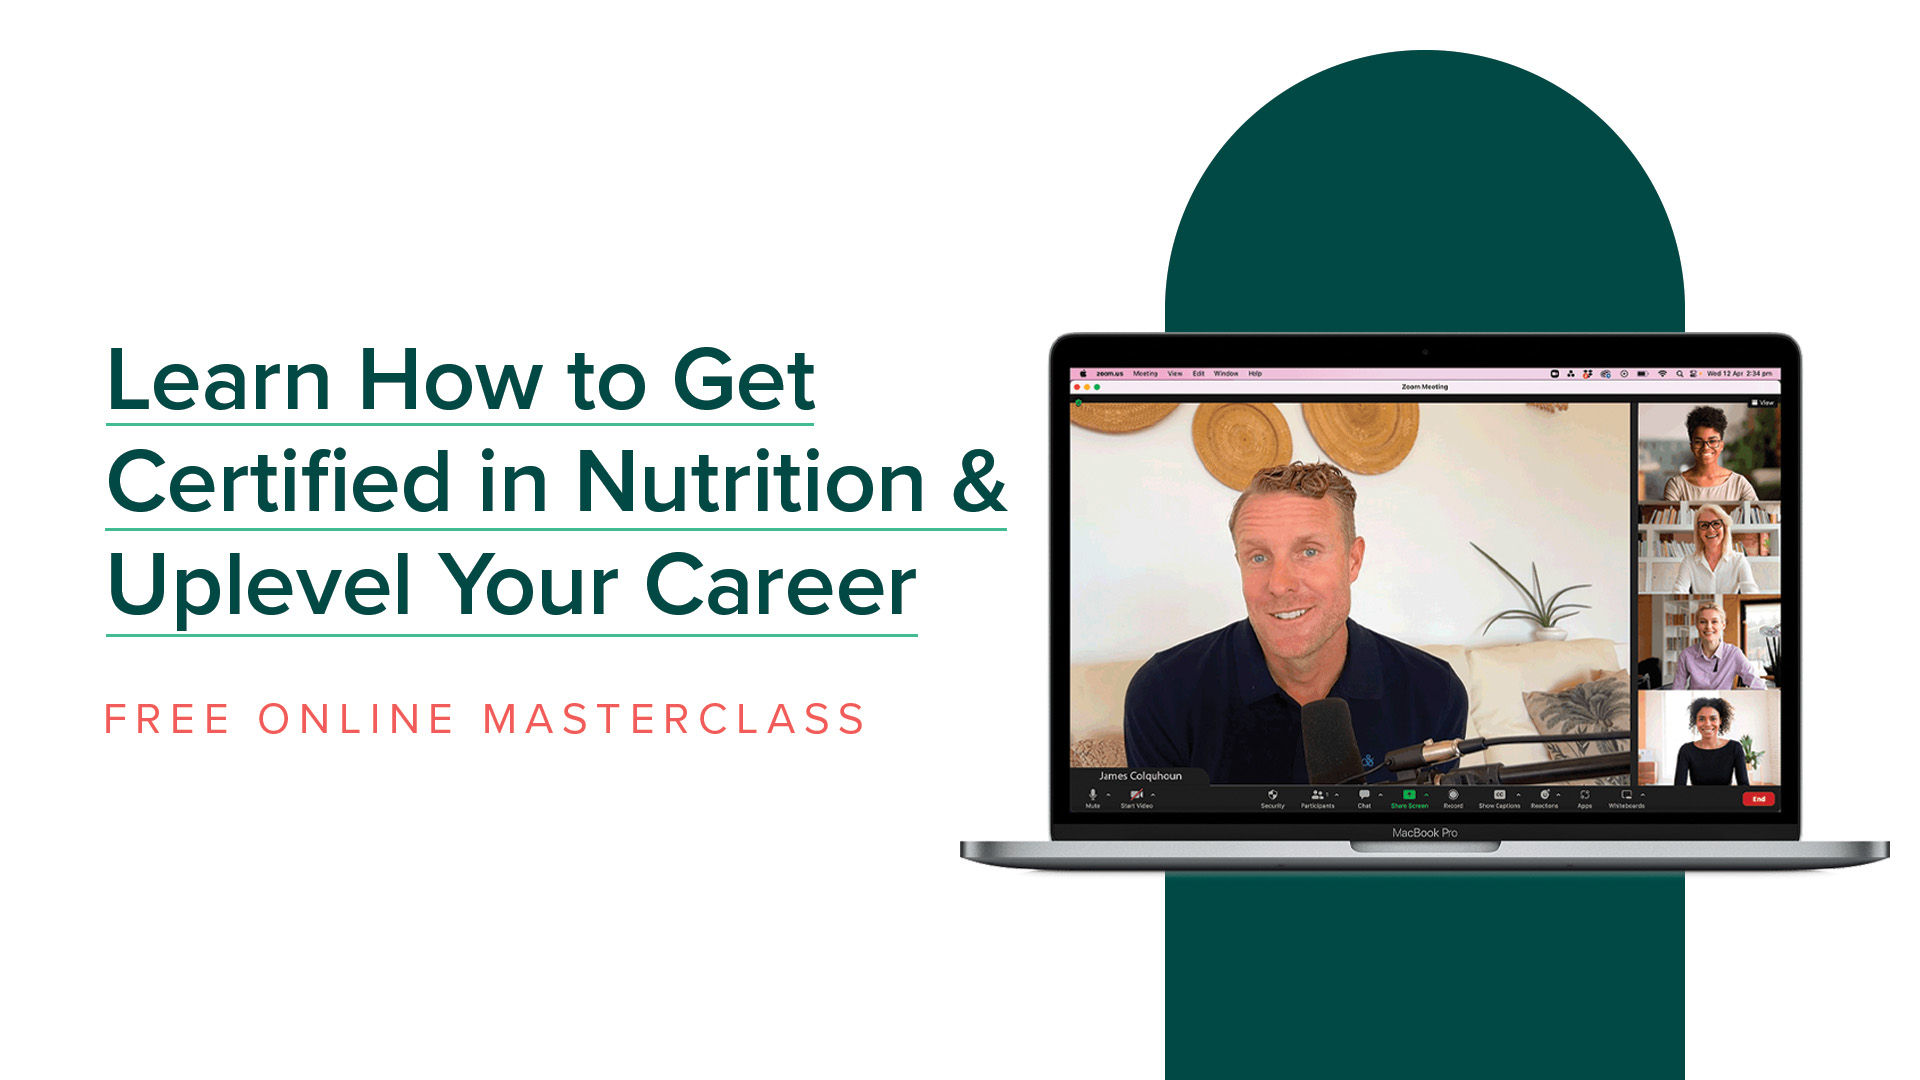 Learn How to Get Certified in Nutrition & Uplevel Your Career